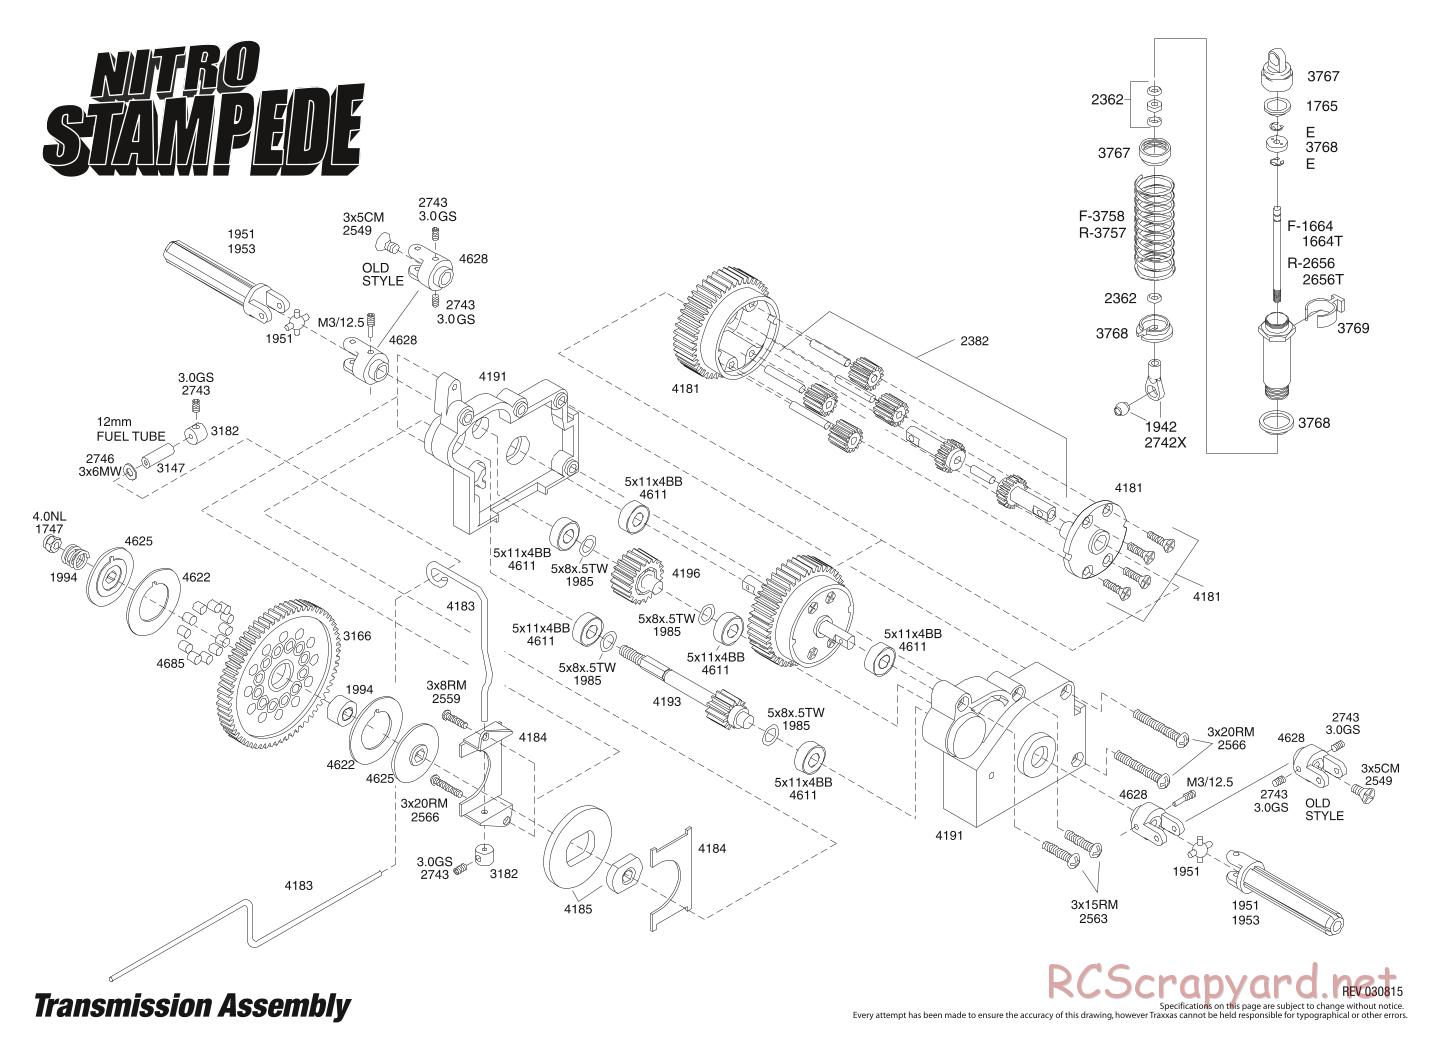 Traxxas - Nitro Stampede - Exploded Views - Page 3